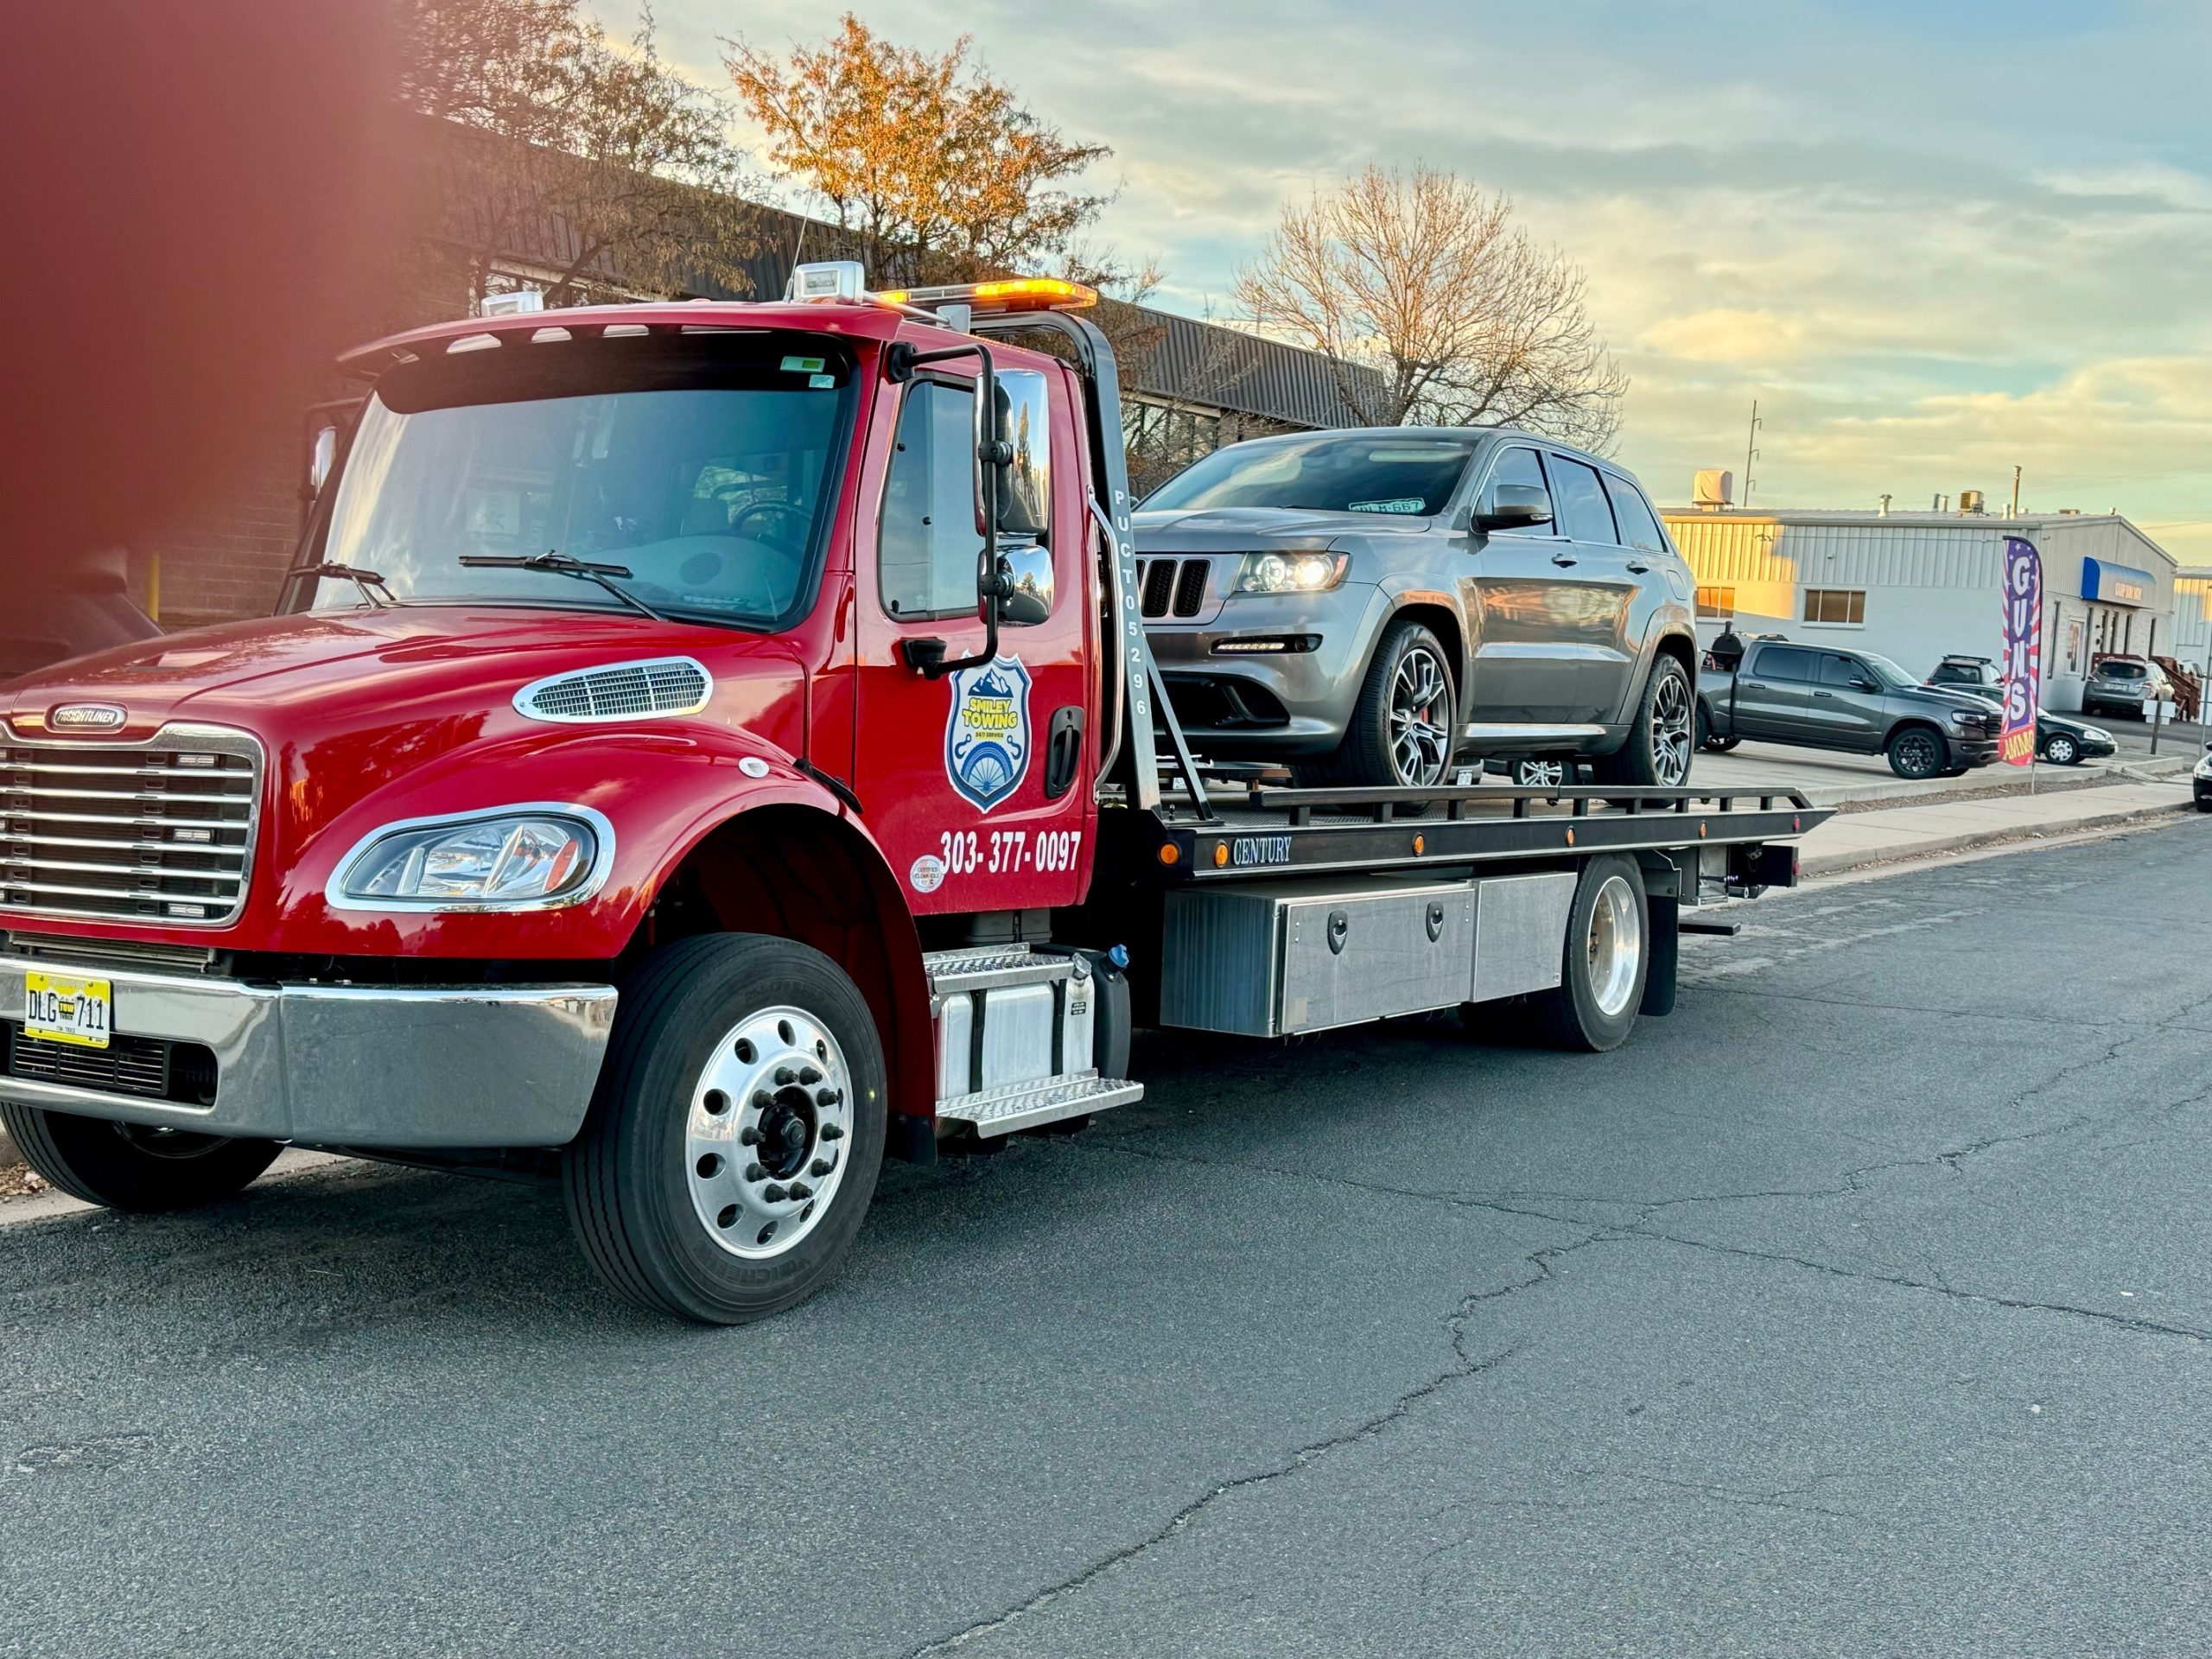 this image shows towing services in Thornton, CO